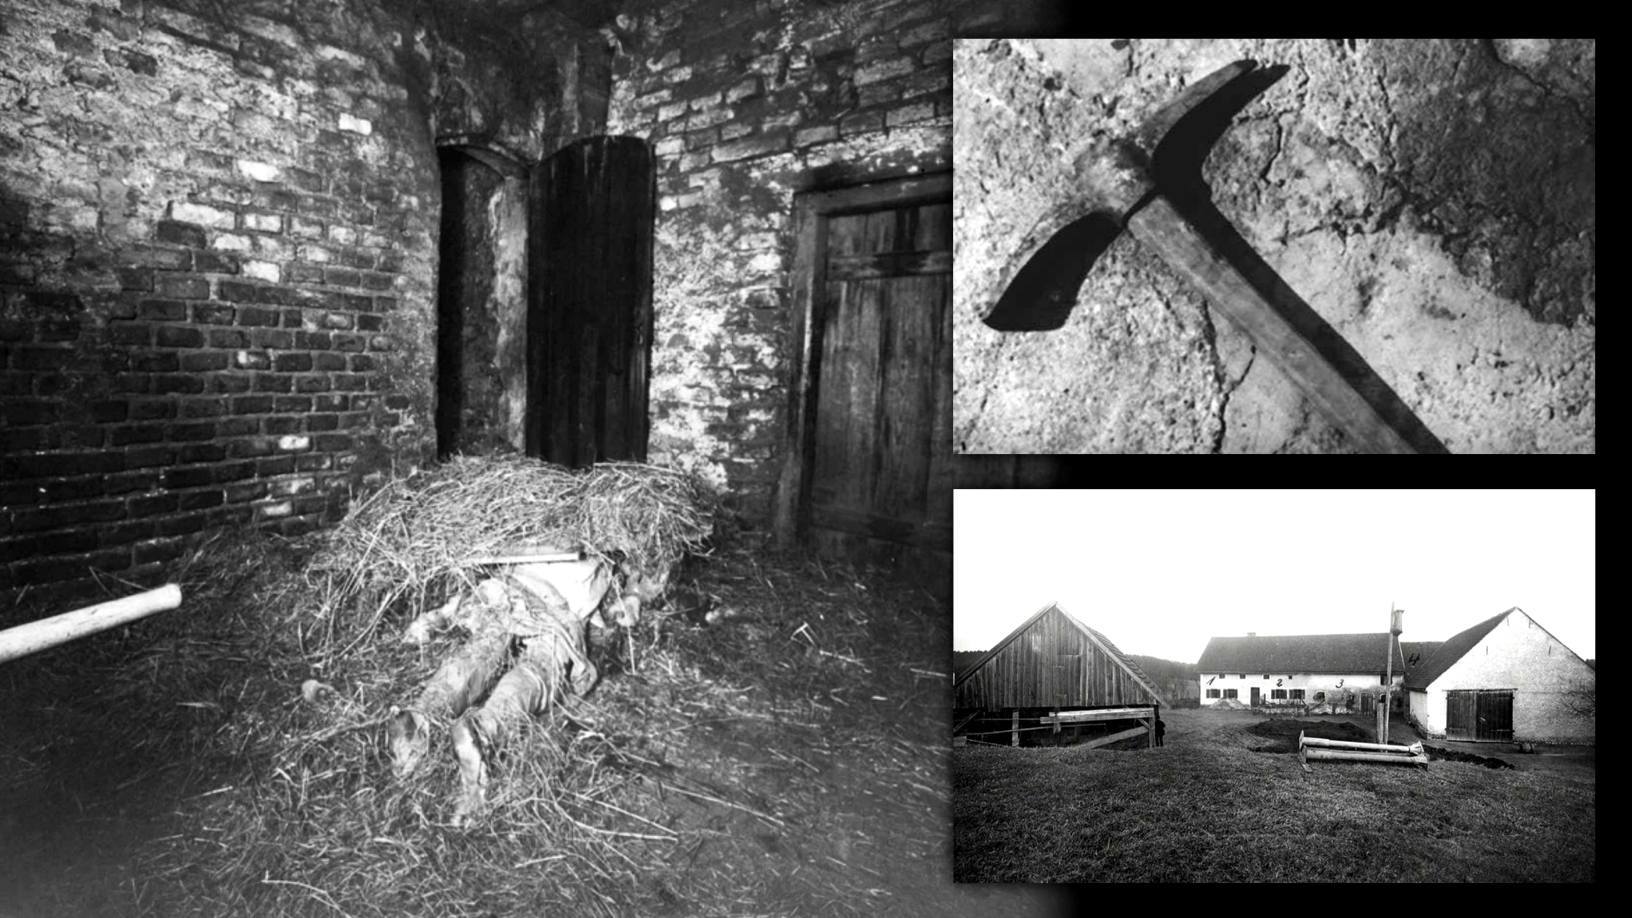 The chilling story of the unsolved Hinterkaifeck murders 2